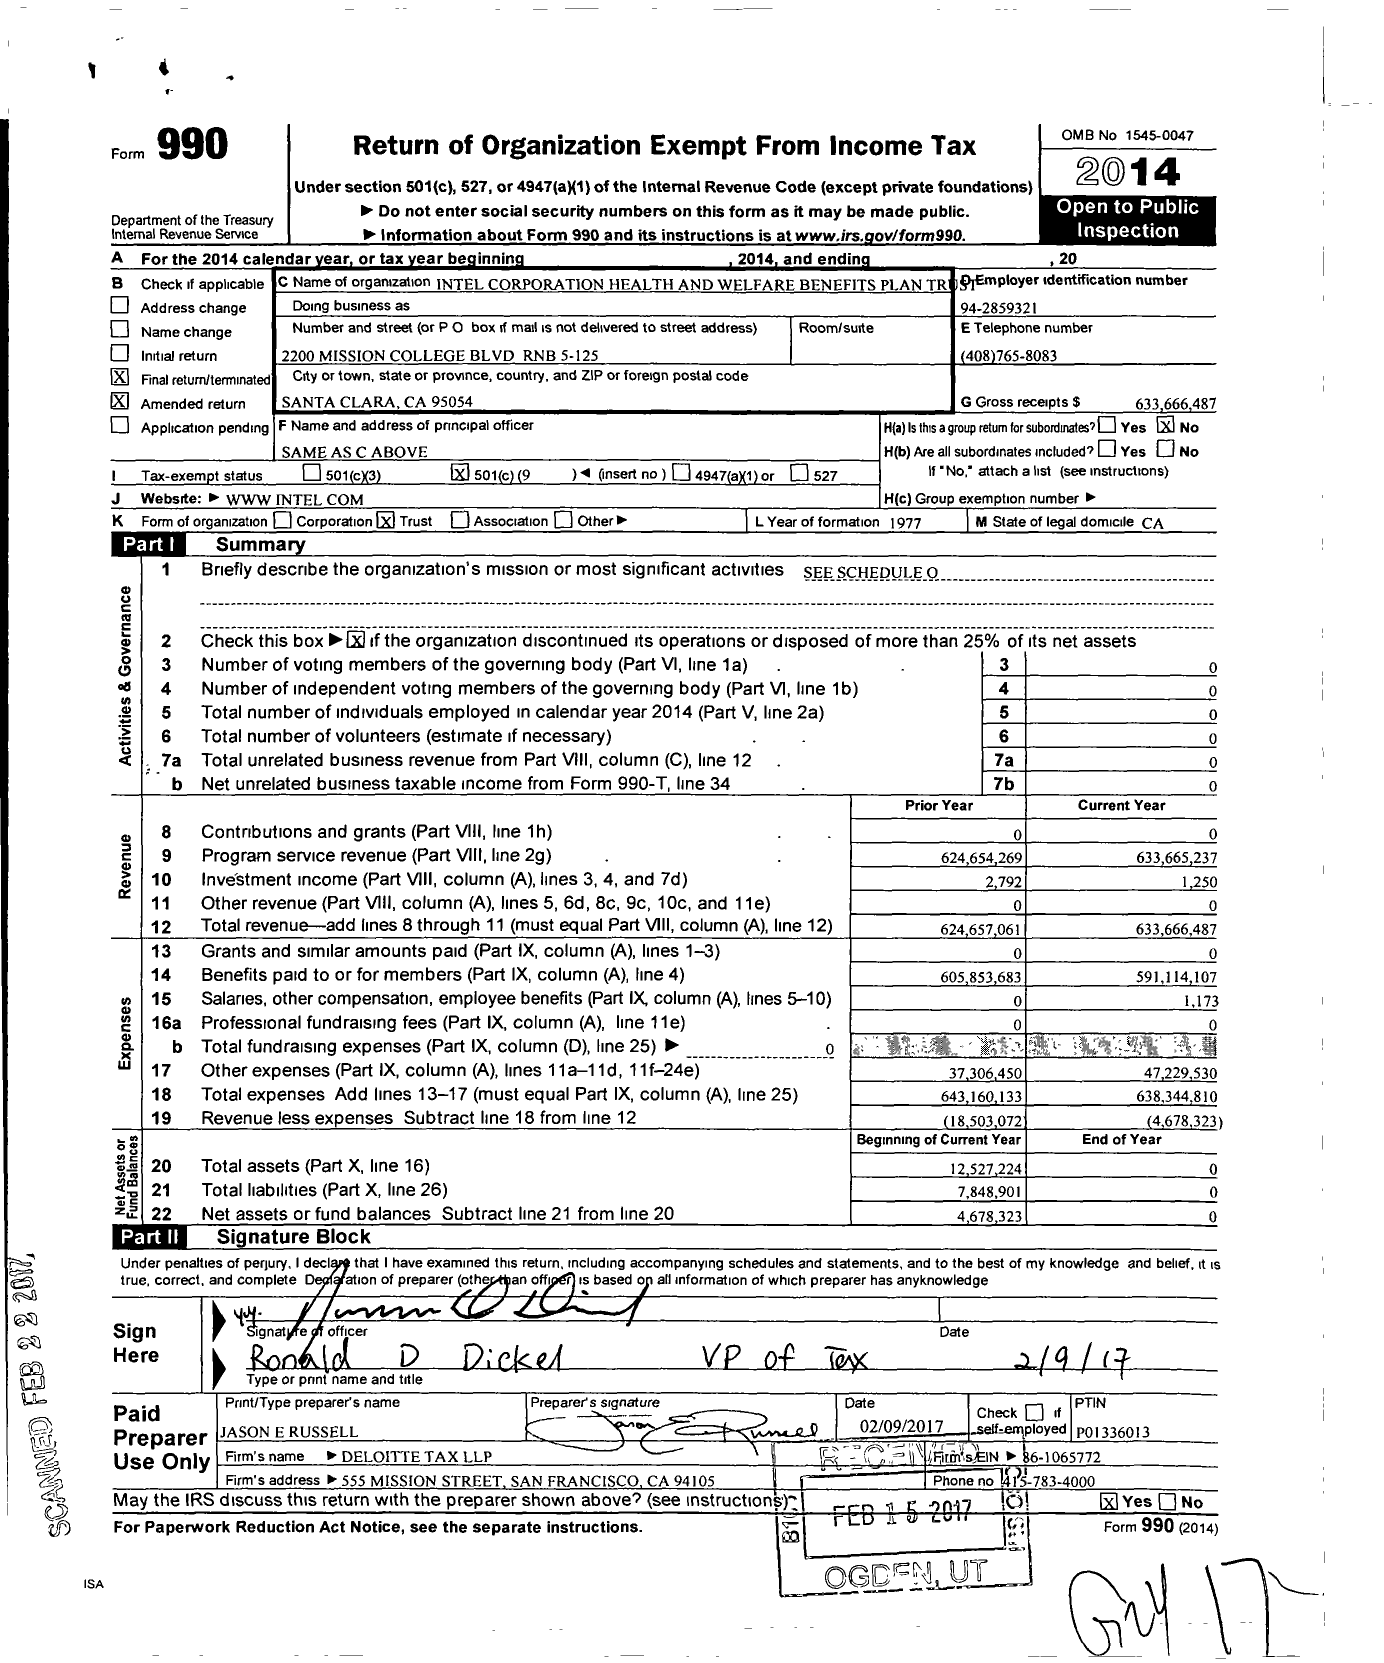 Image of first page of 2014 Form 990O for Intel Corporation Health and Welfare Benefits Plan Trust